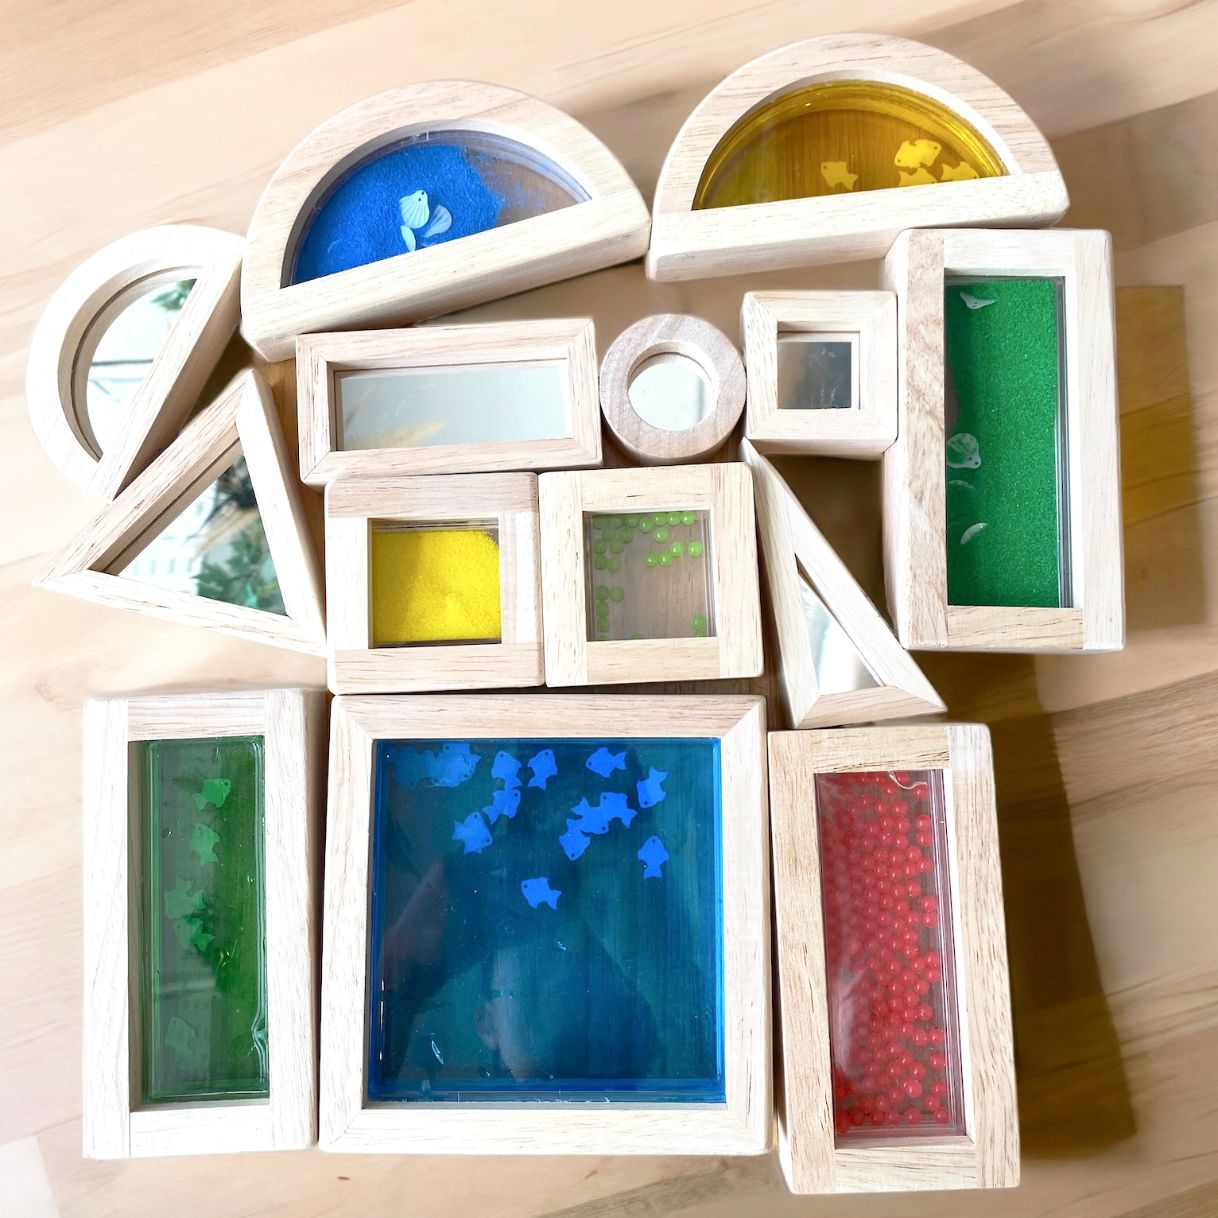 Wooden sensory blocks with liquid, sand with shells or beads